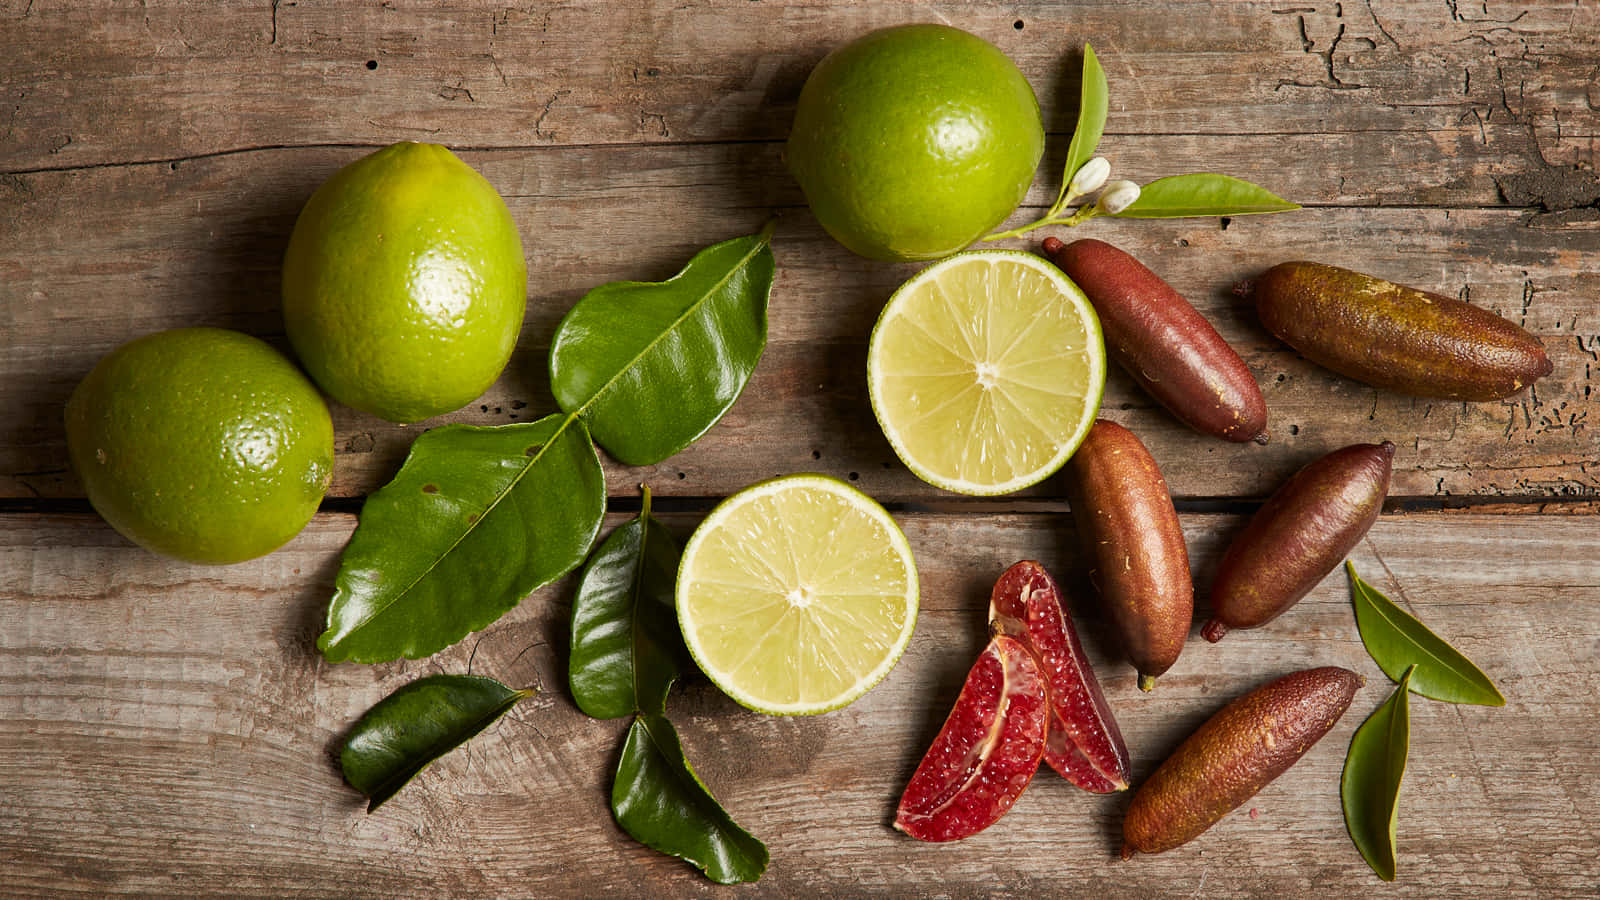 A Bunch Of Limes And Other Fruit On A Wooden Table